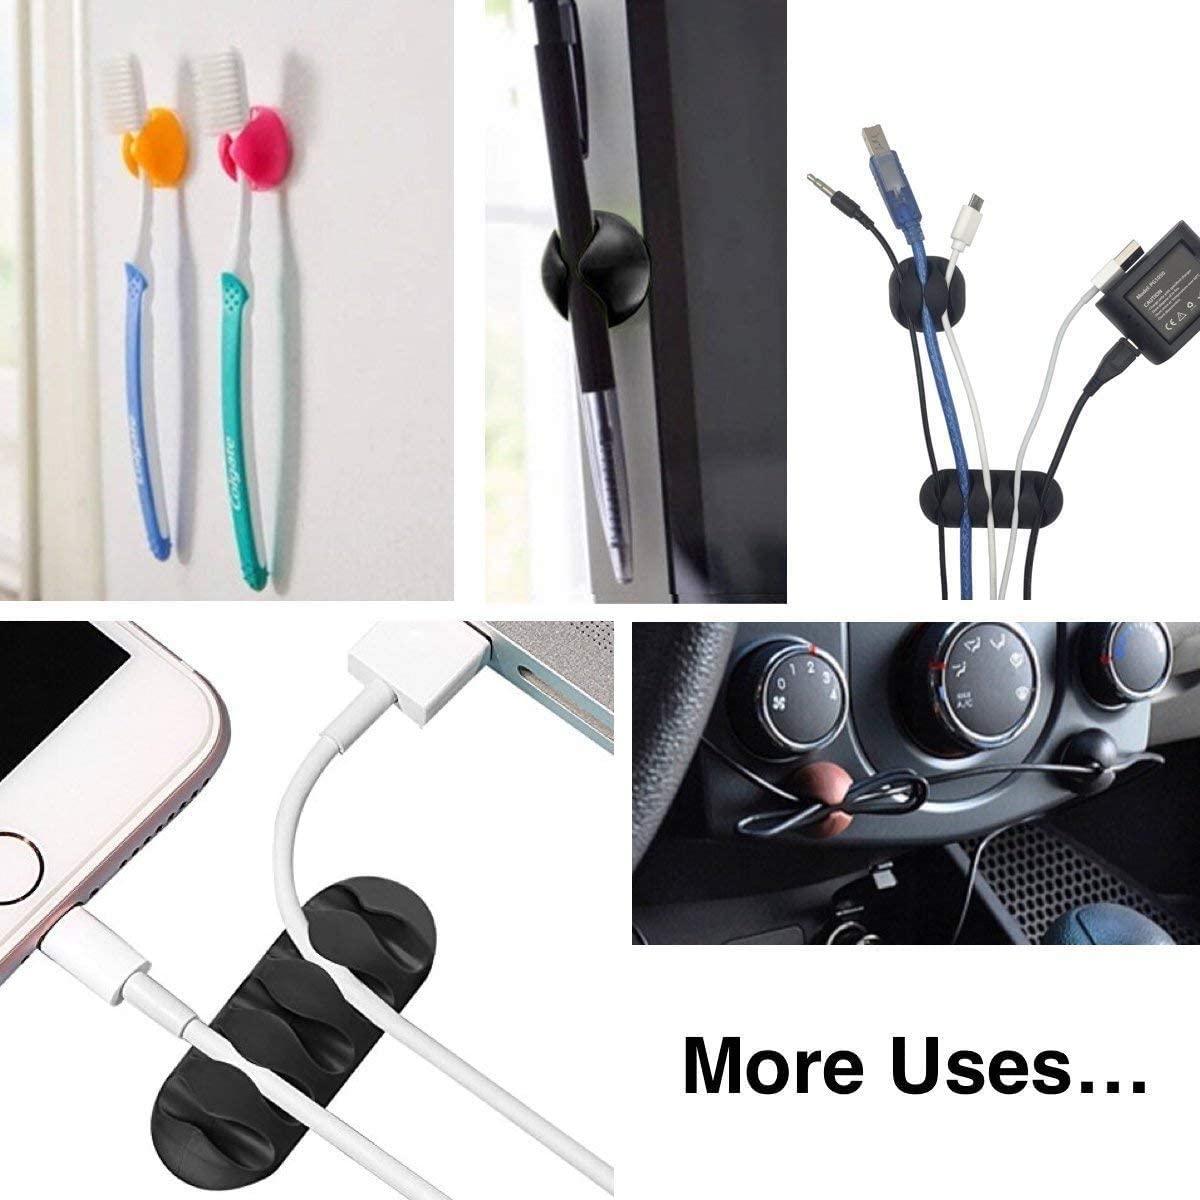 Buy 16 Pack Black Cord Organizer Cable Management for Home and Office discounted | Products On Sale Australia